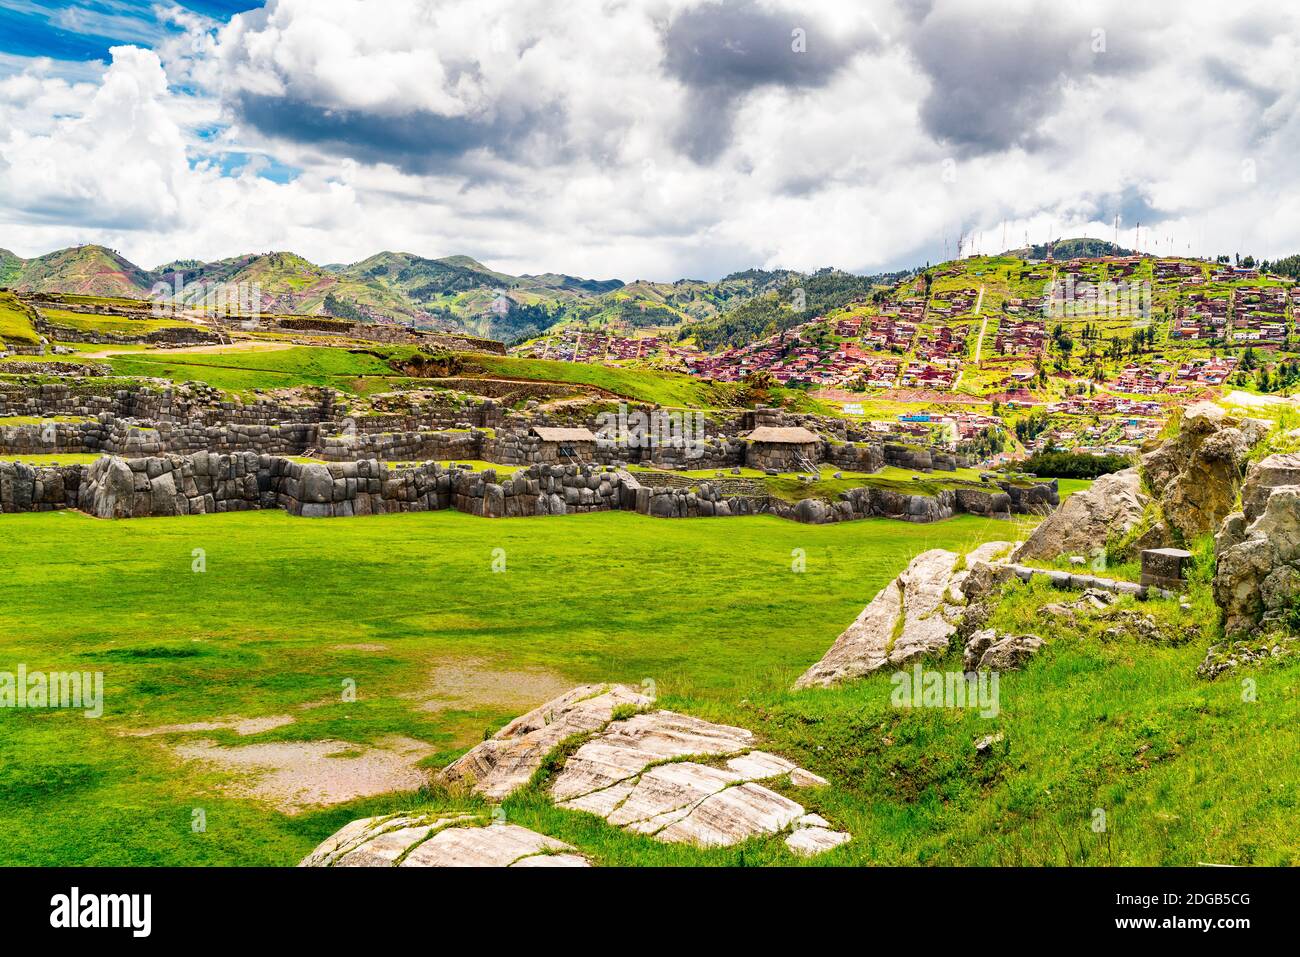 Saqsaywaman, a citadel on the northern outskirts of the city of Cusco Stock Photo